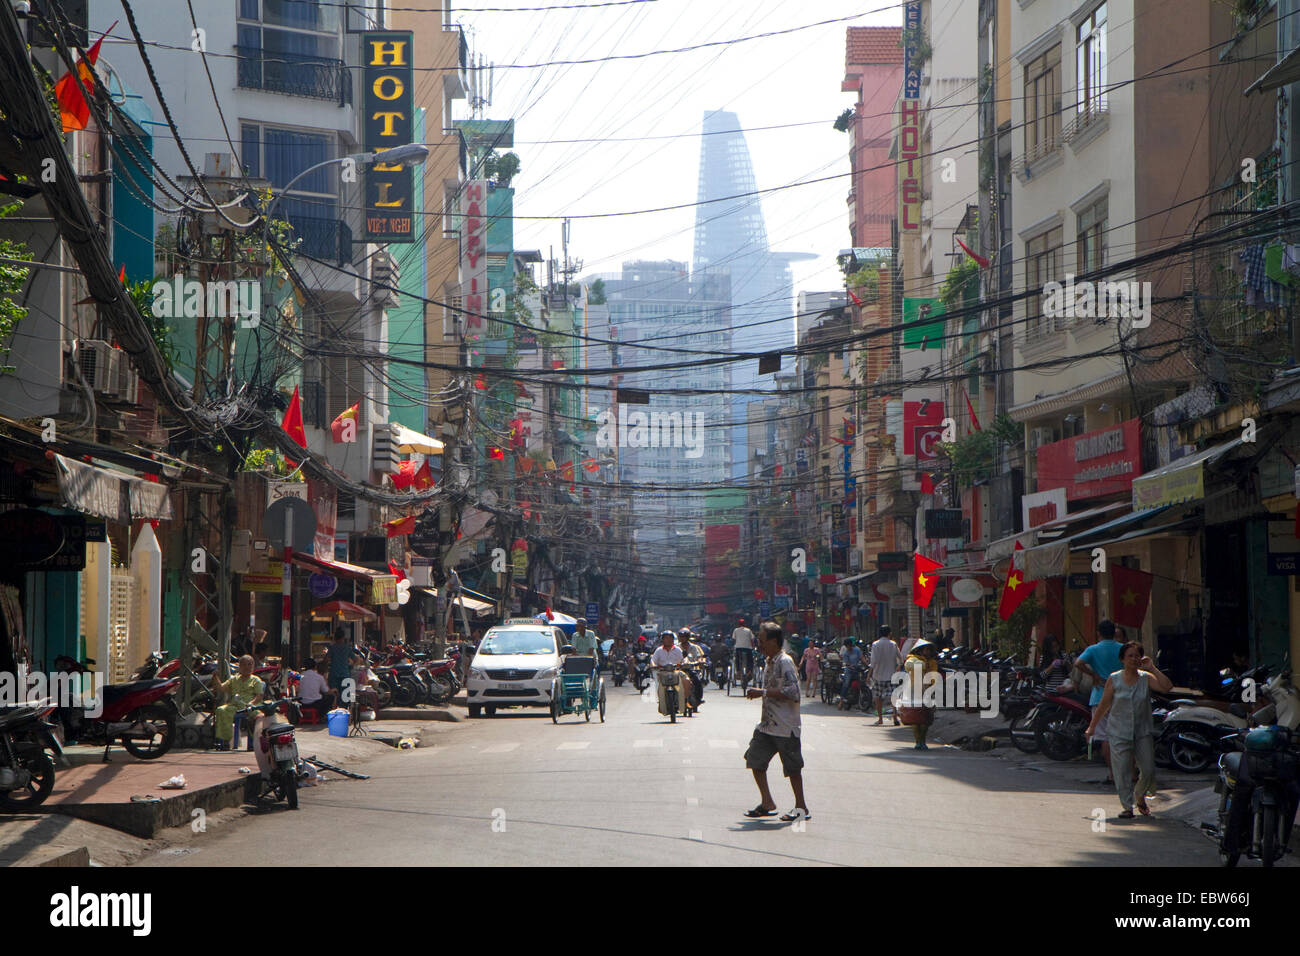 View of Bui Vien Street in Ho Chi Minh City, Vietnam. Stock Photo